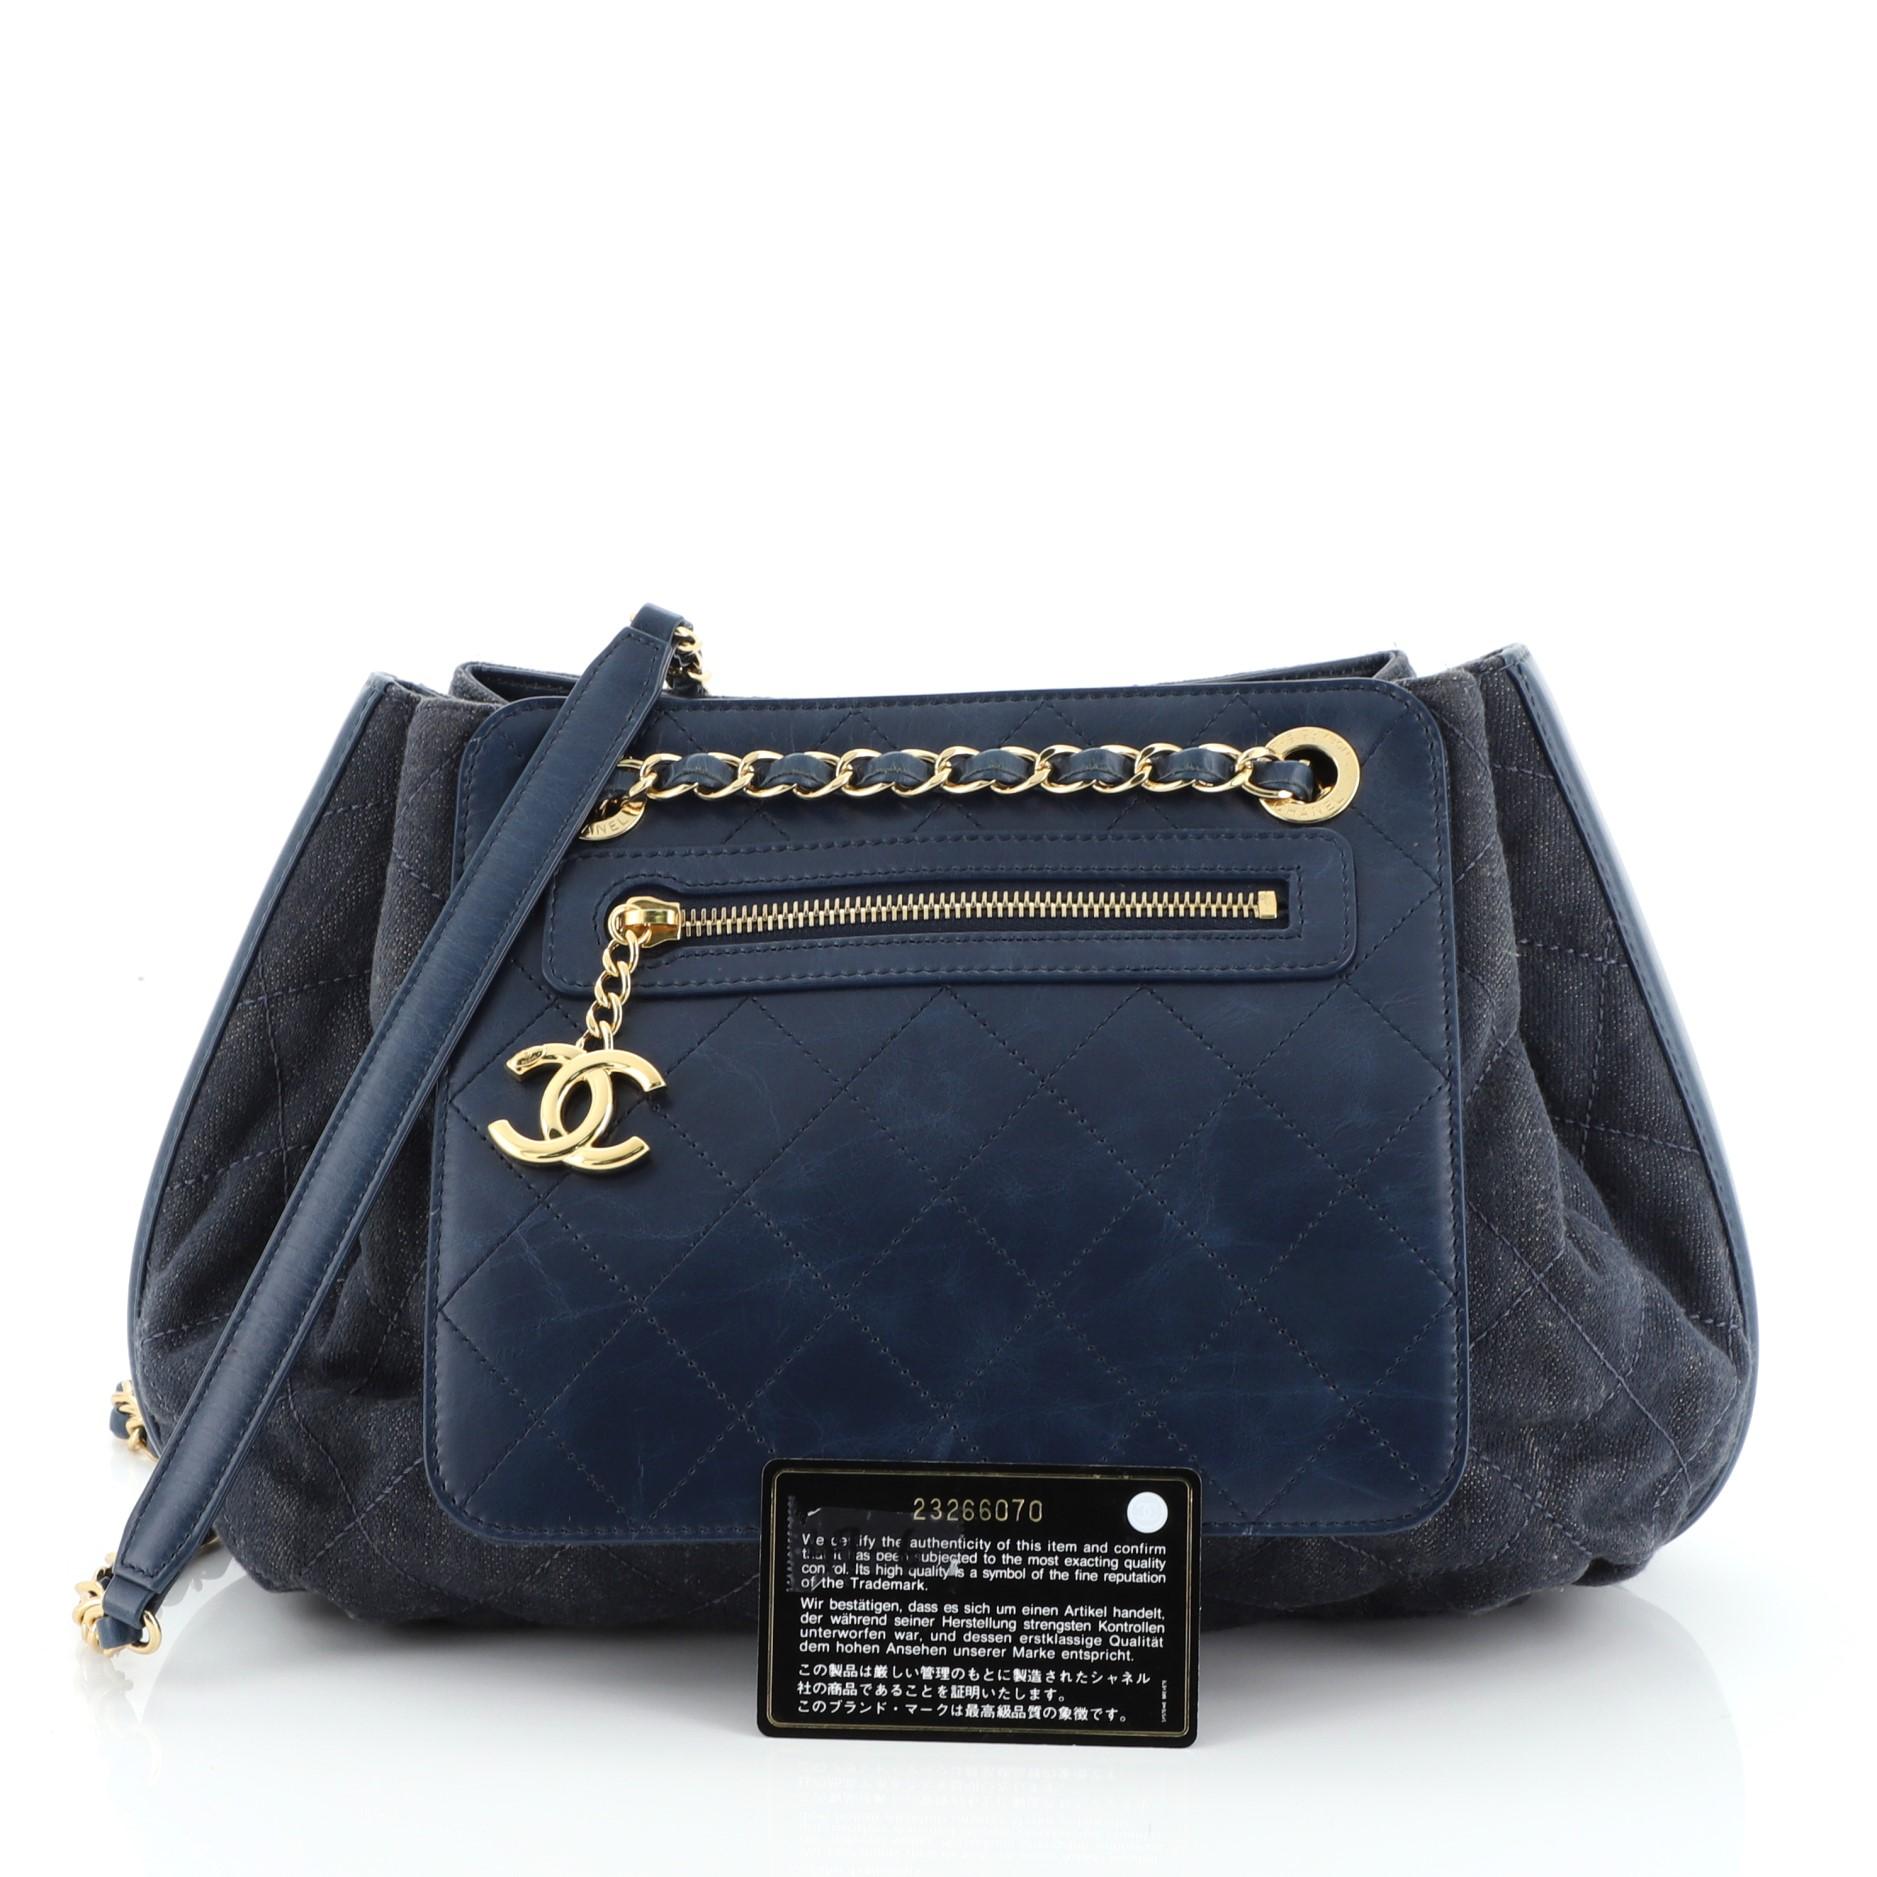 This Chanel Drawstring Shoulder Bag Quilted Denim and Aged Calfskin Medium, crafted from blue quilted denim and aged calfskin leather, features woven-in leather chain strap with leather shoulder pad, exterior front zip pocket, and gold-tone